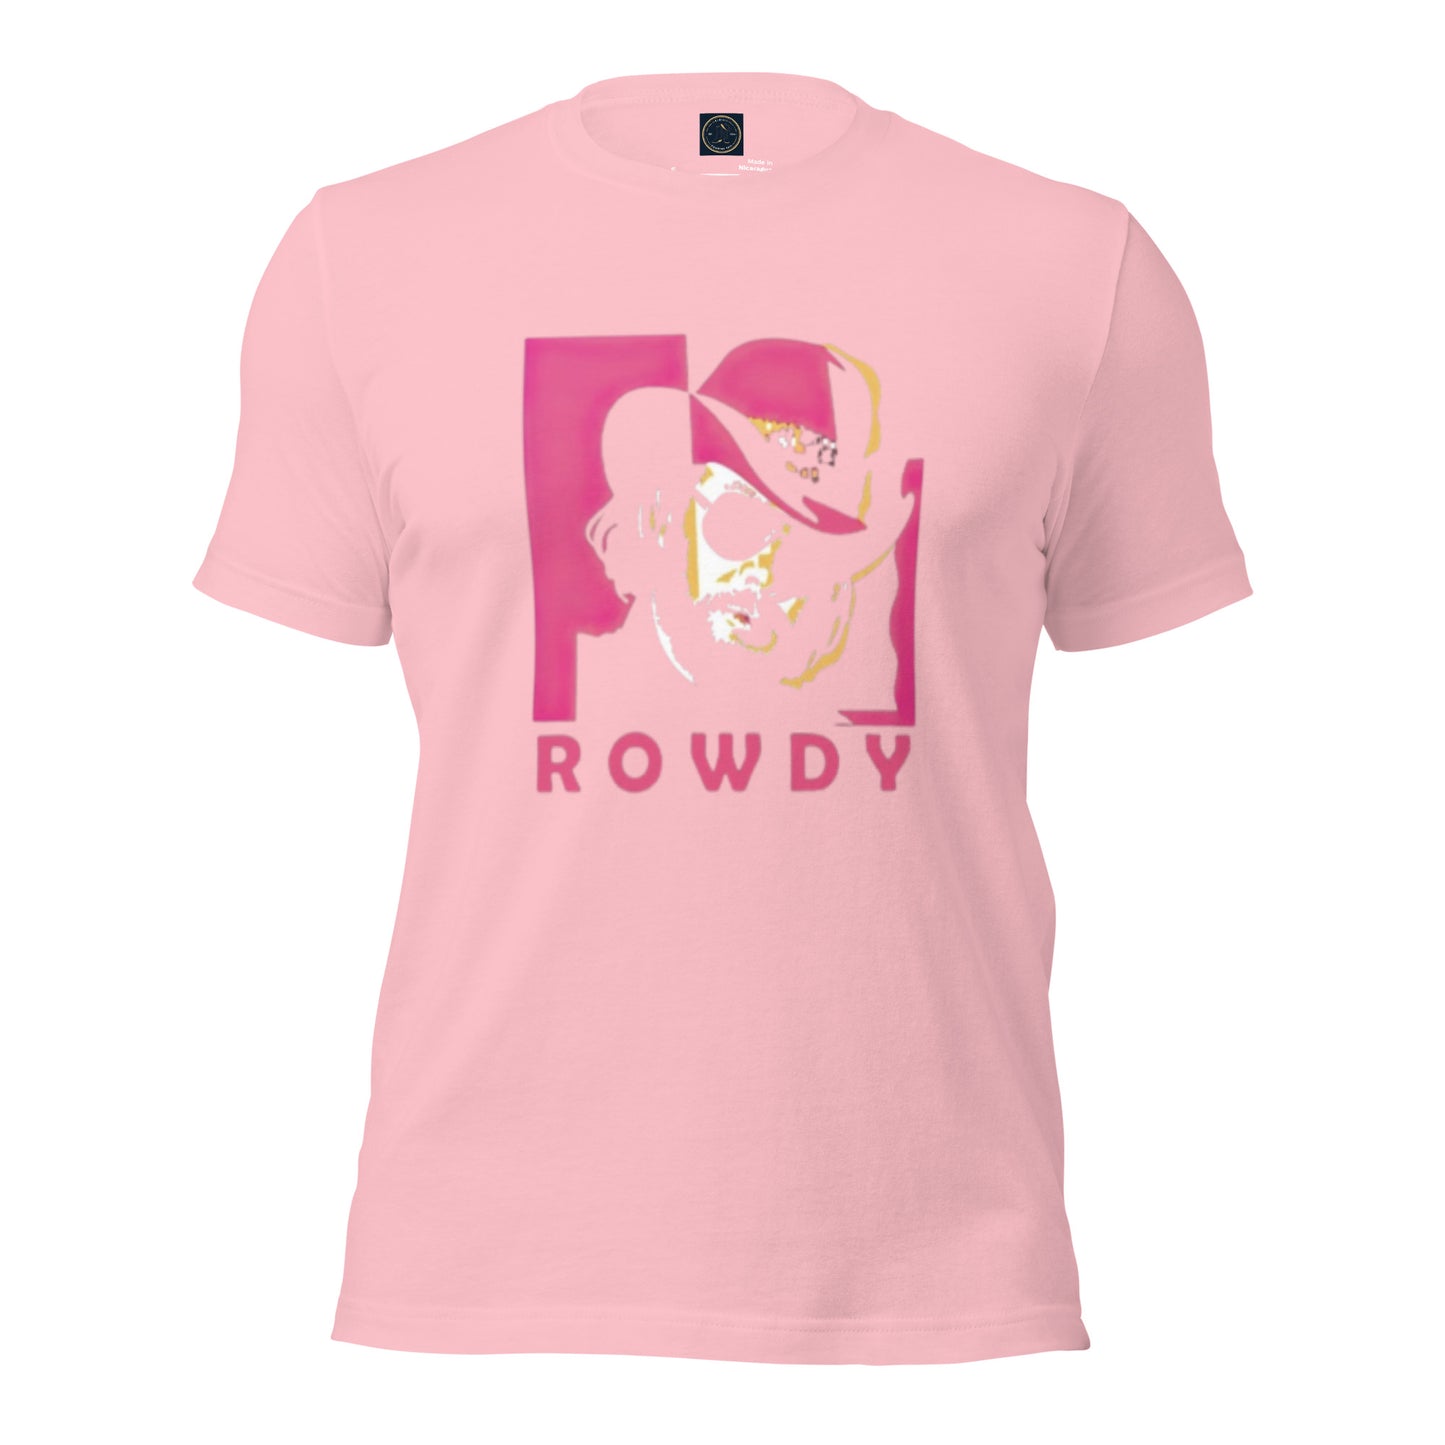 Rowdy - Classic Country Tees